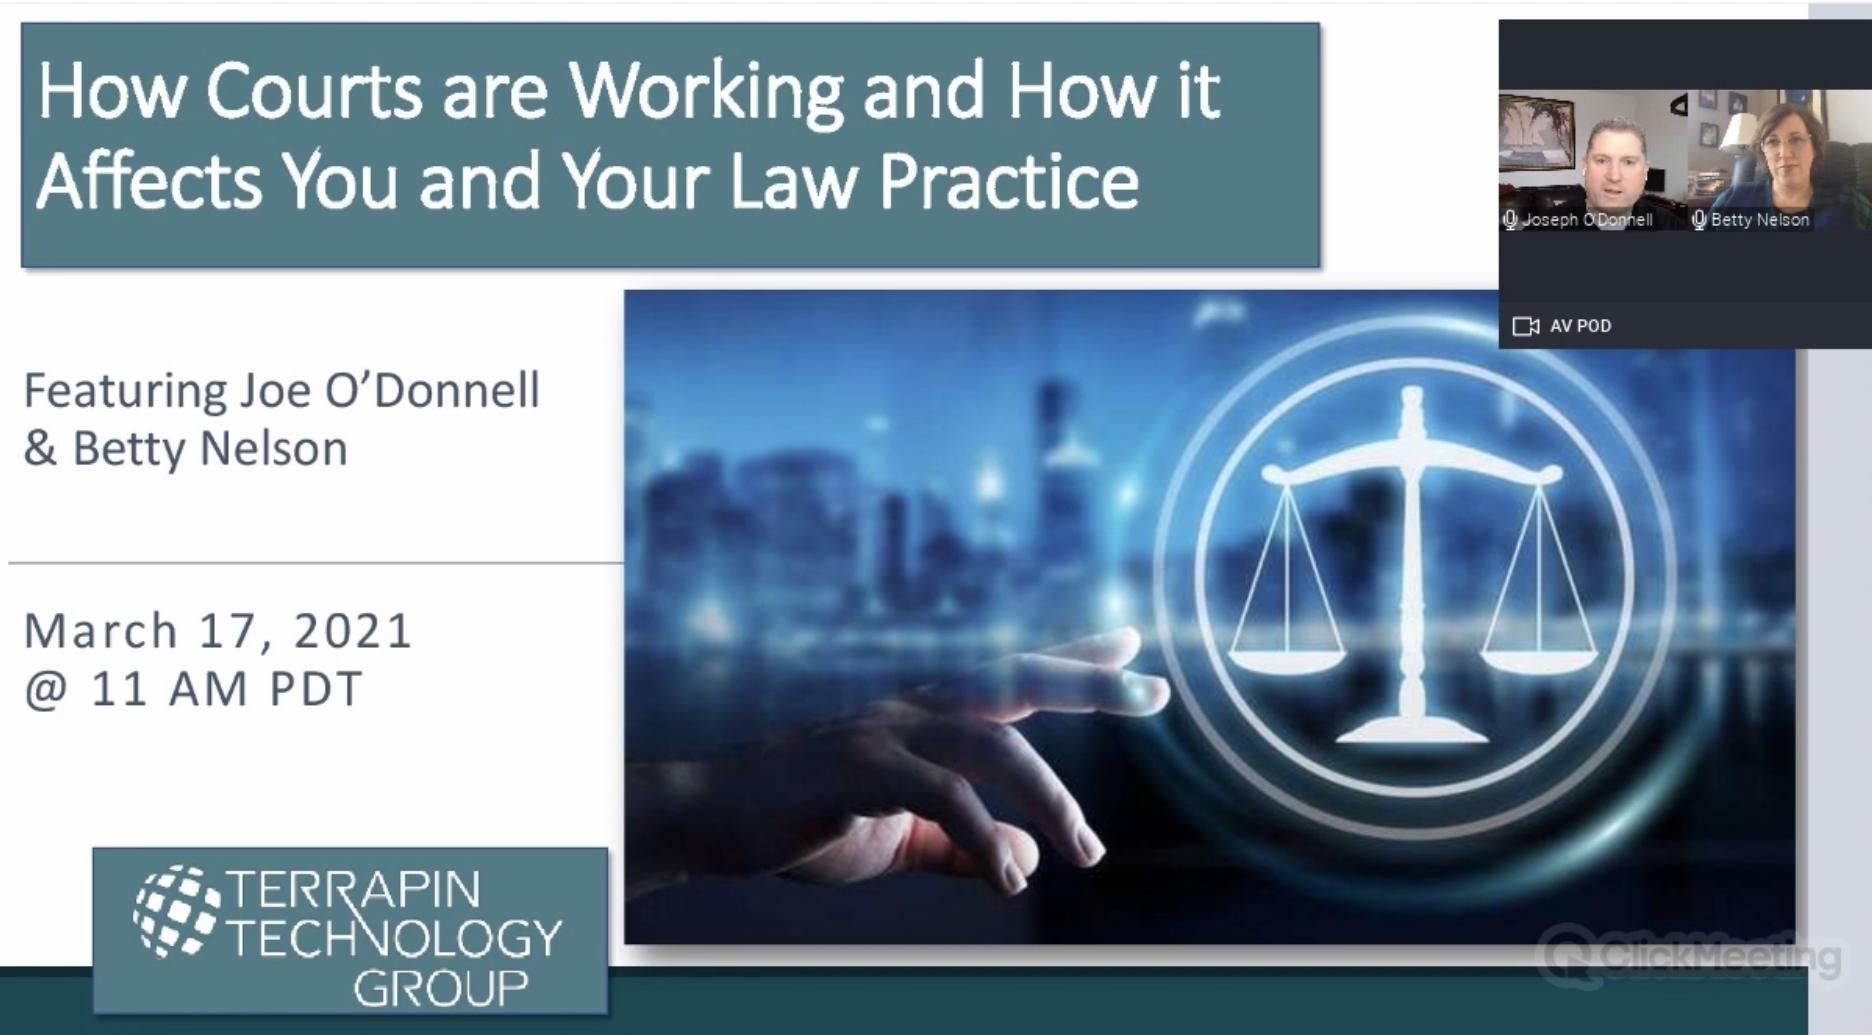 How Courts are Working and How it Affects You and Your Practice